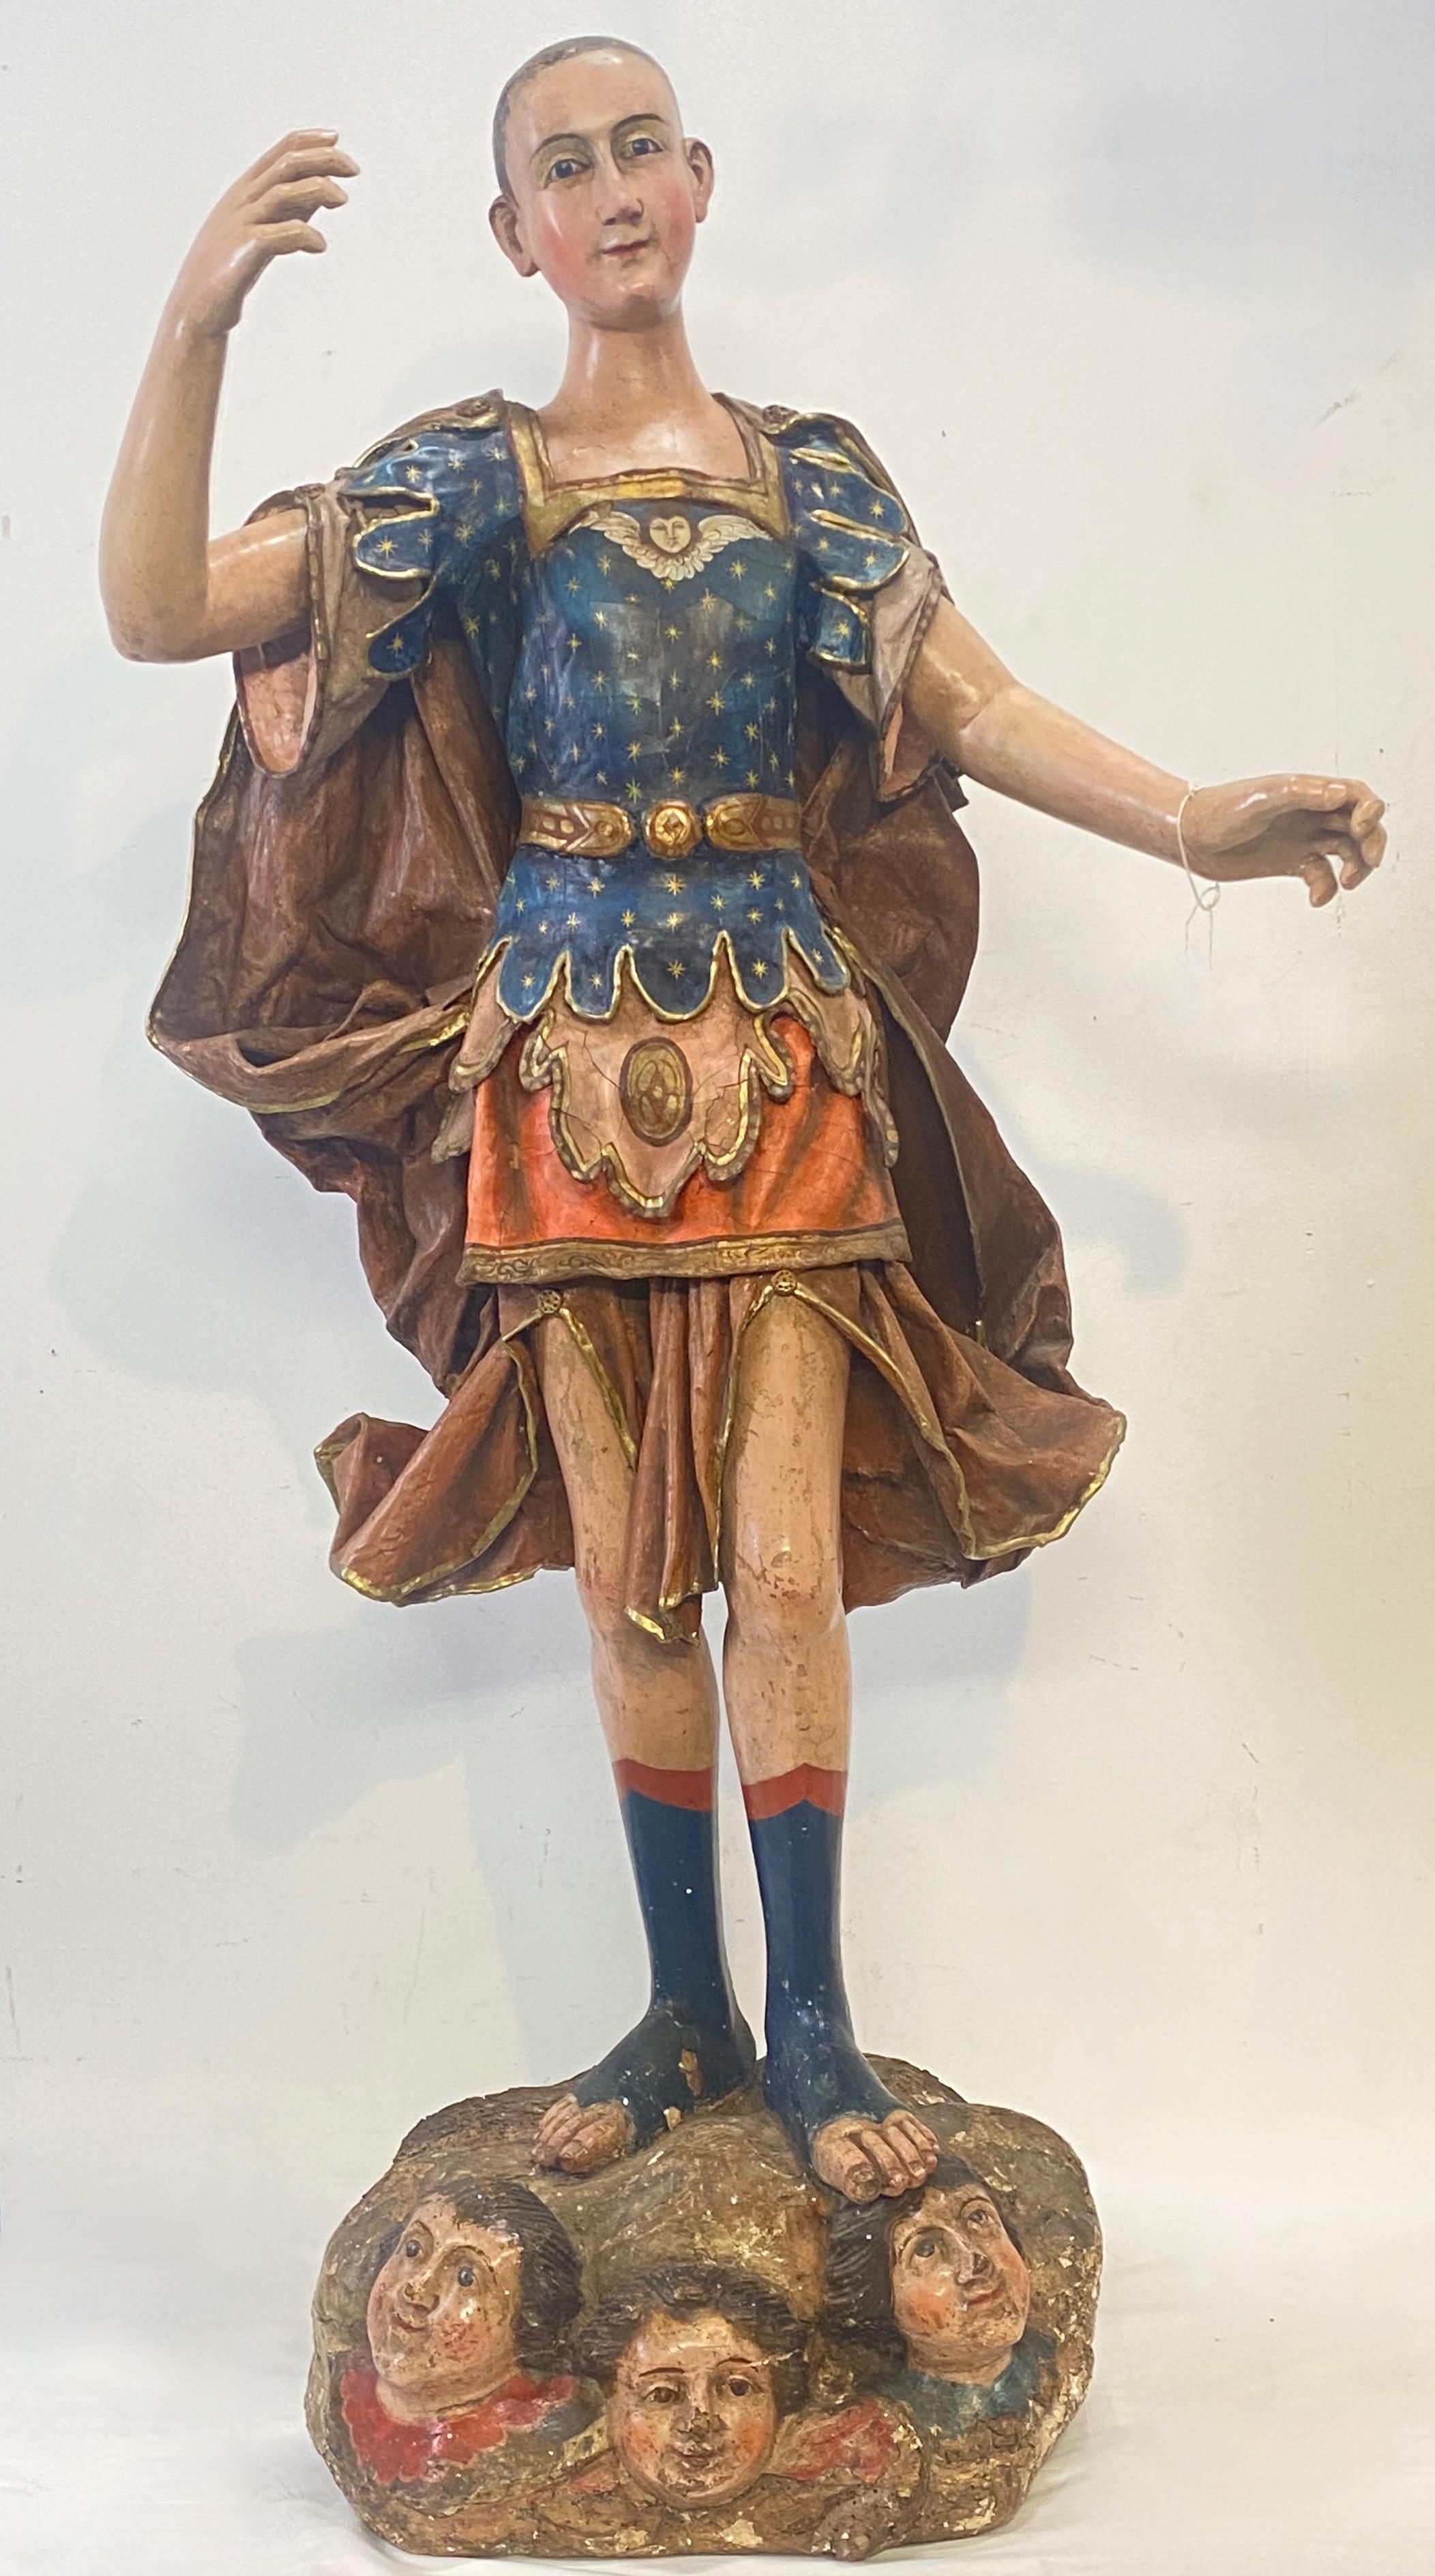 An impressive life size late 18th century Spanish Colonial Santo figure, most likely Mexican. Carved and painted wood, the cape and other clothing is gessoed and painted canvas with wonderful detail. Condition is remarkable, though the paint appears